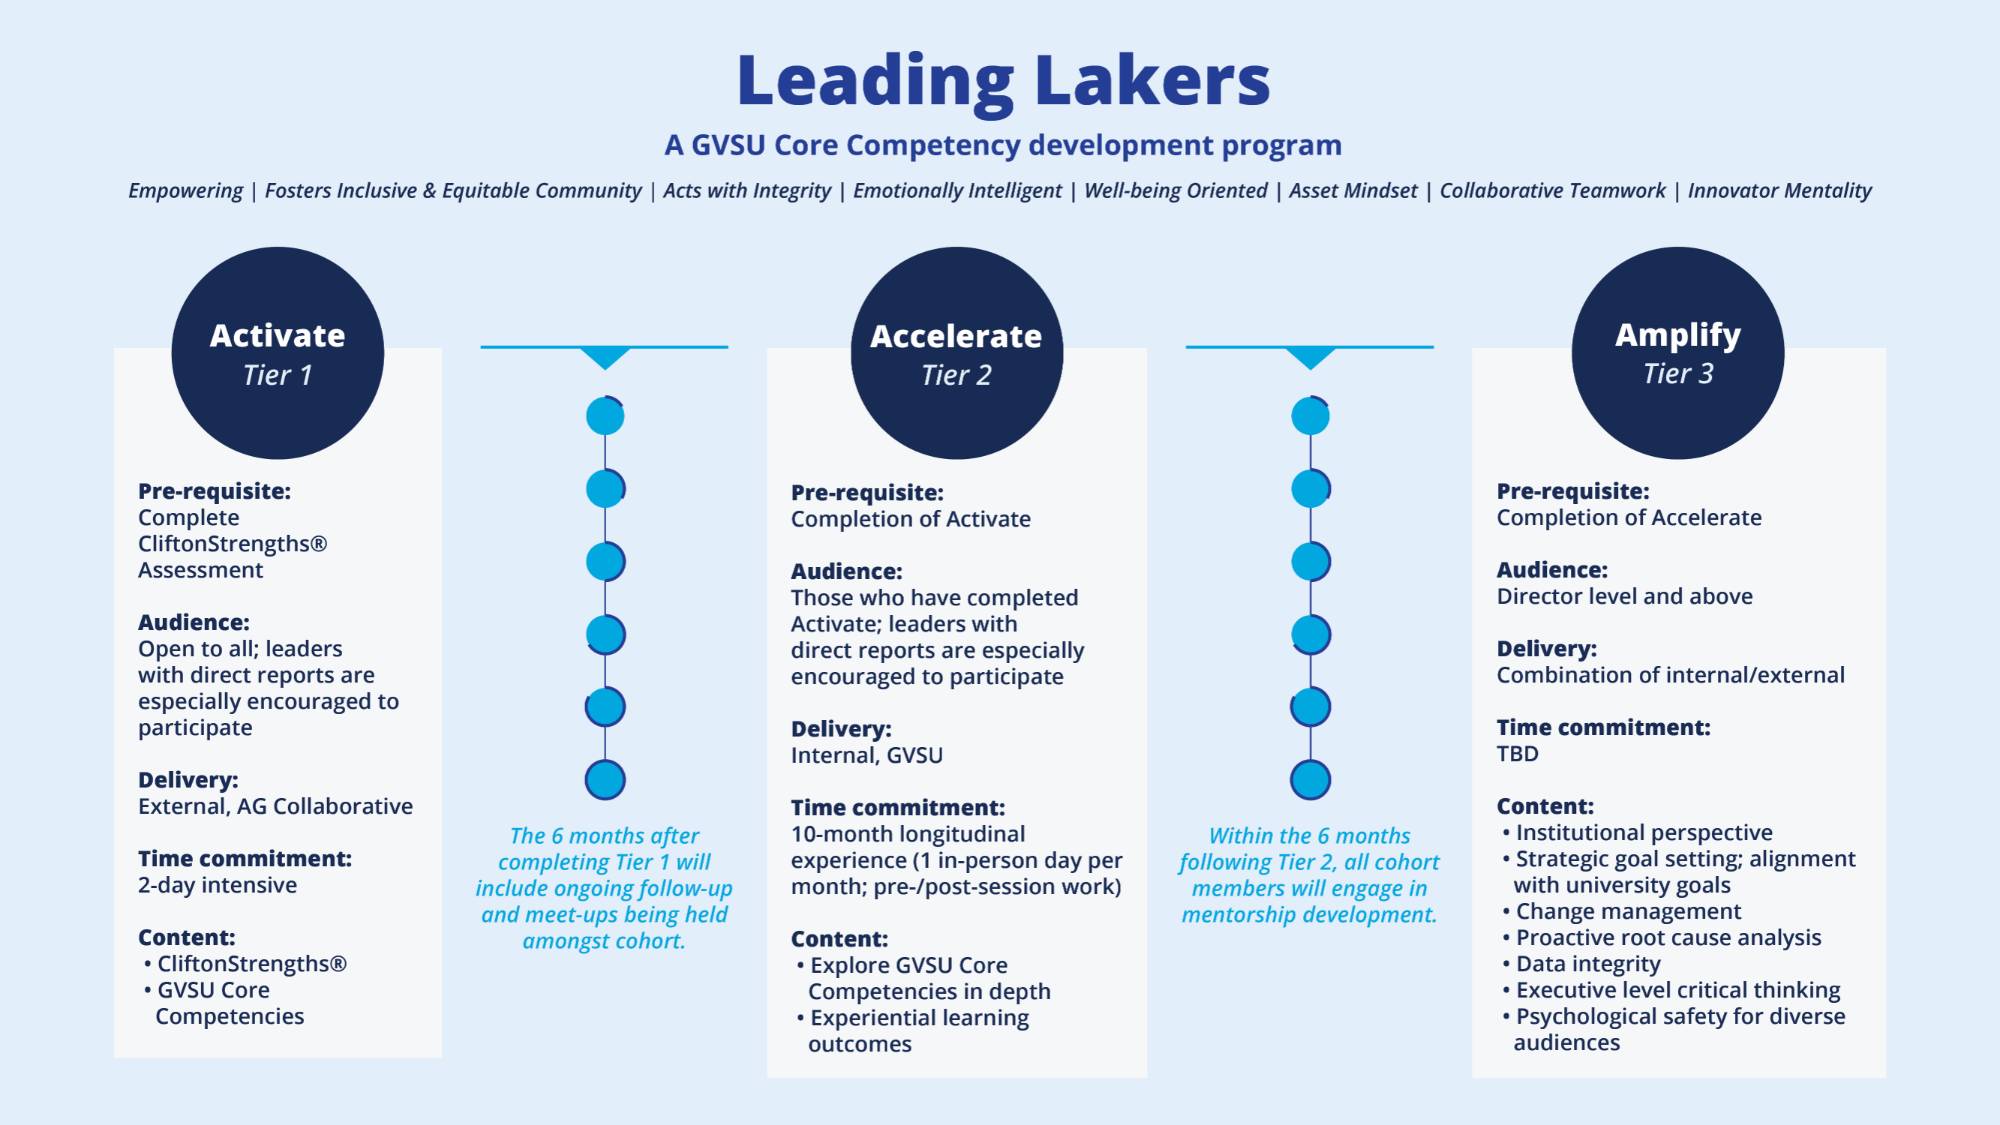 Leading Lakers leadership development programming outline: Activate (Tier 1), Accelerate (Tier 2), and Amplify (Tier 3)